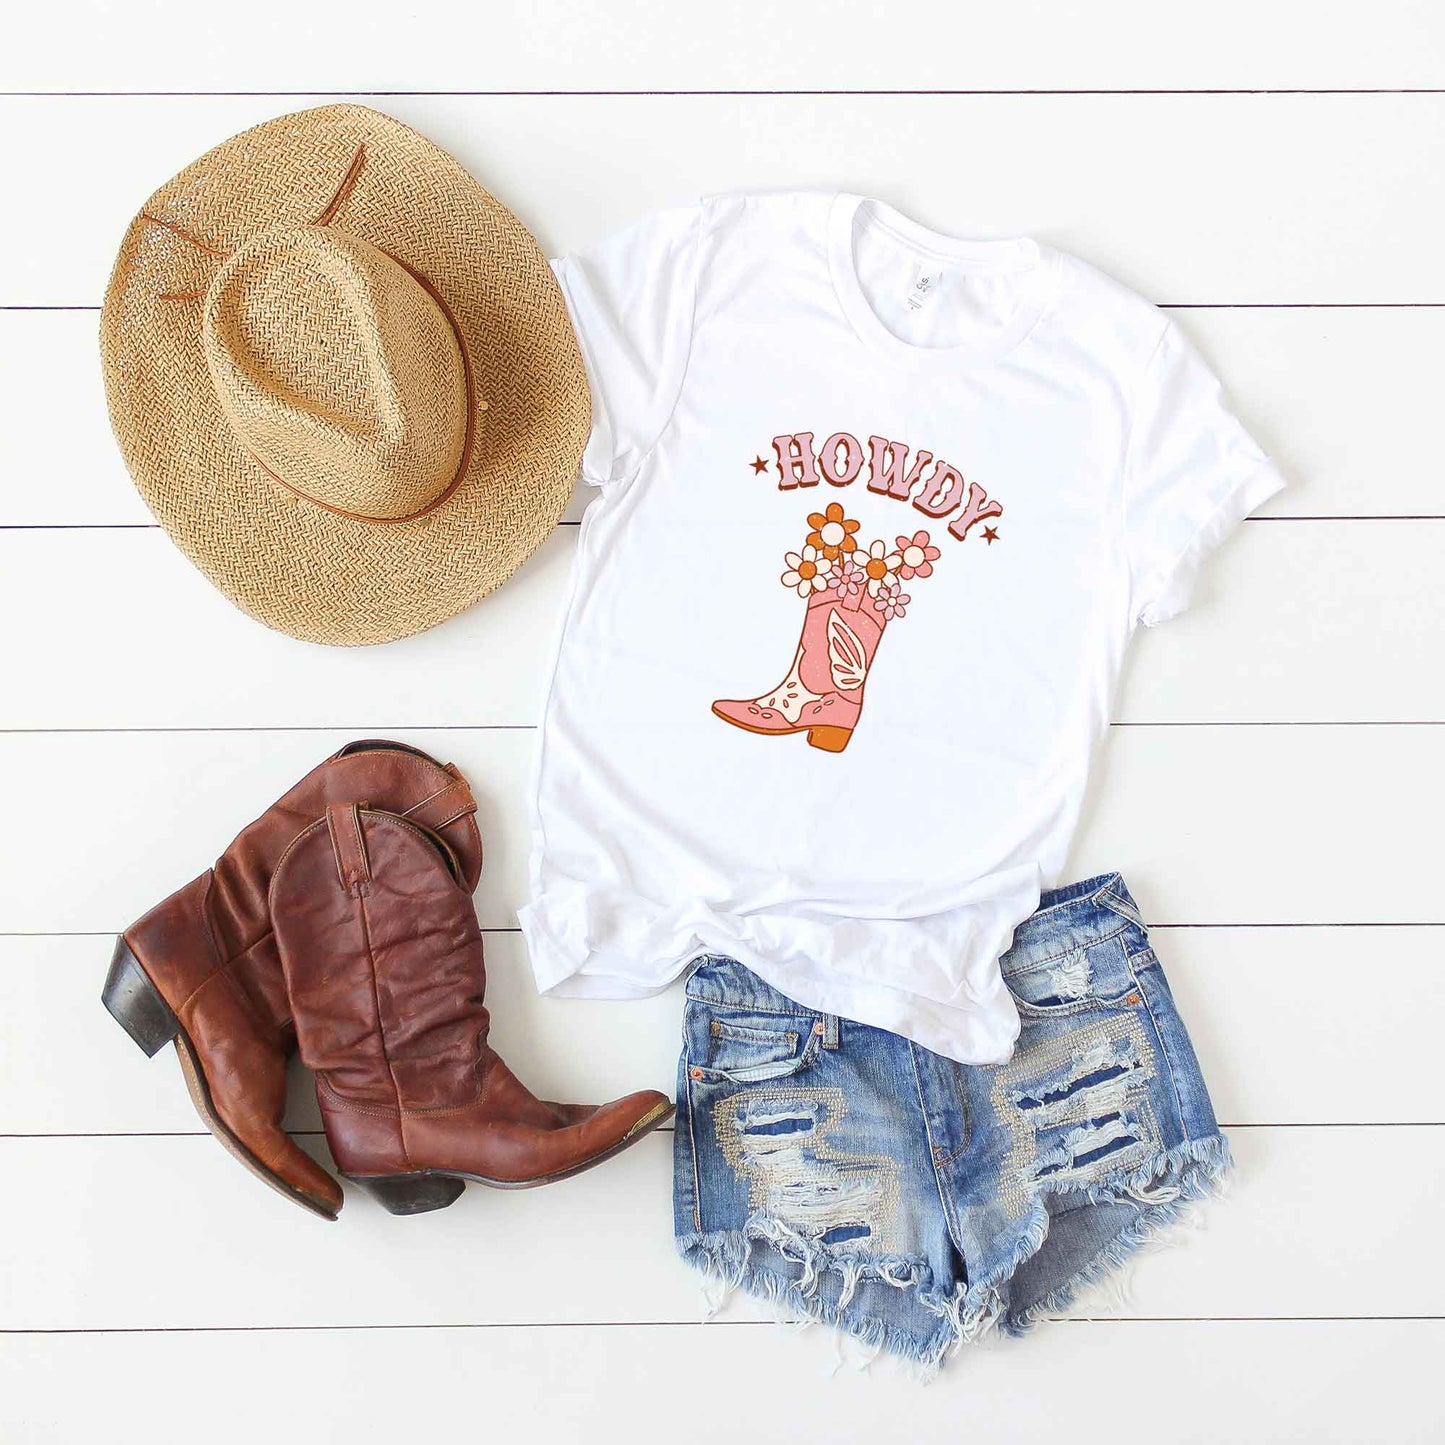 Howdy Boot | Short Sleeve Graphic Tee